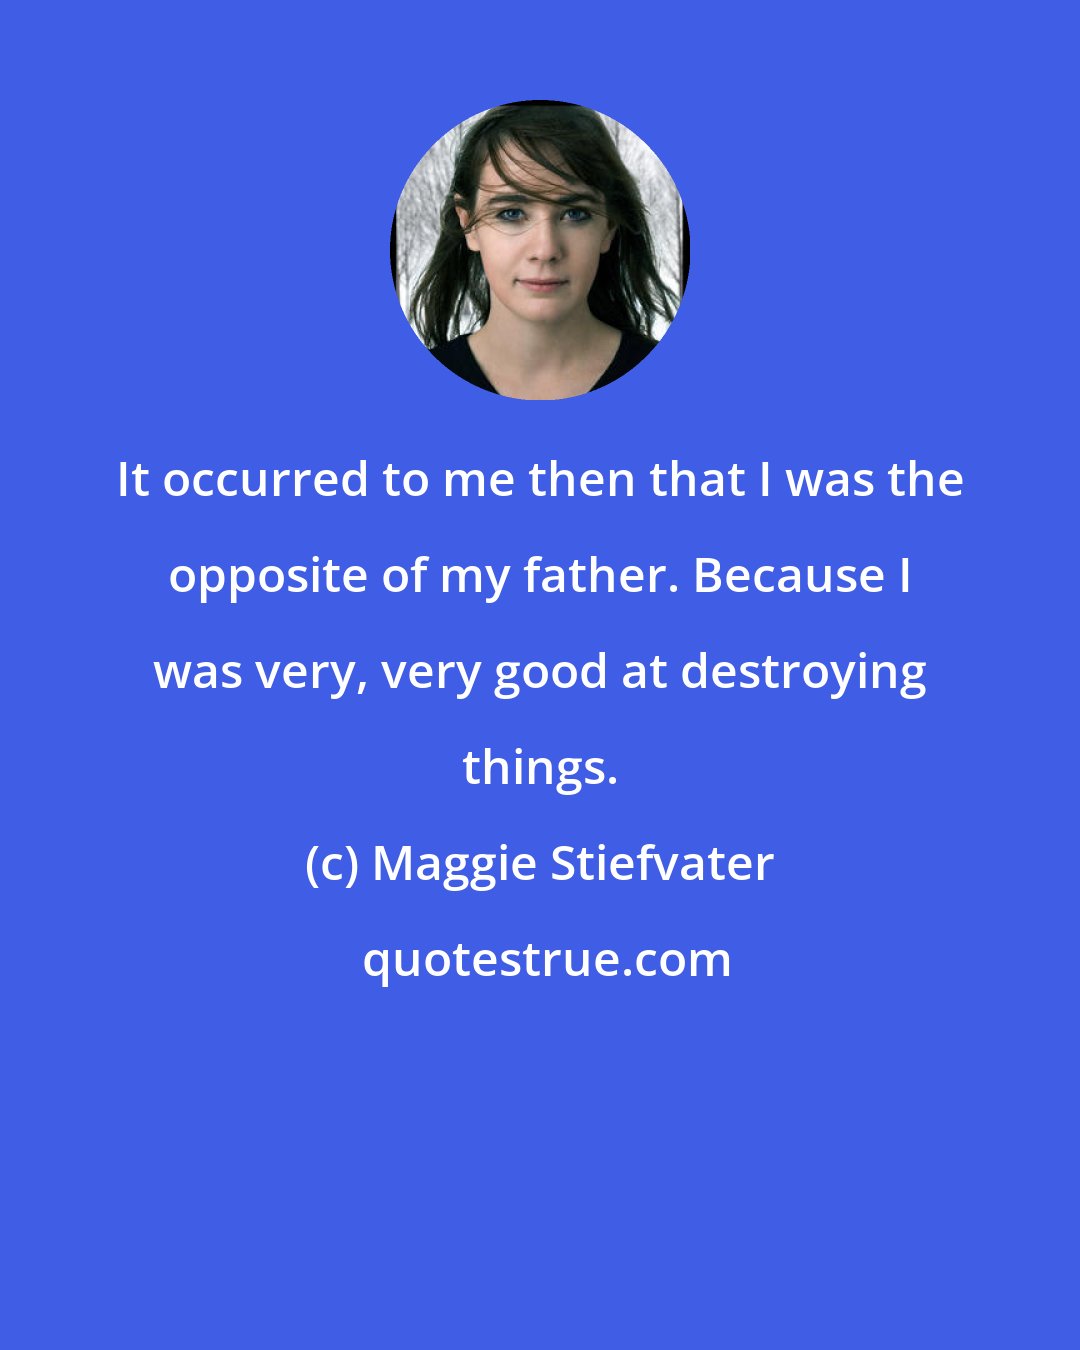 Maggie Stiefvater: It occurred to me then that I was the opposite of my father. Because I was very, very good at destroying things.